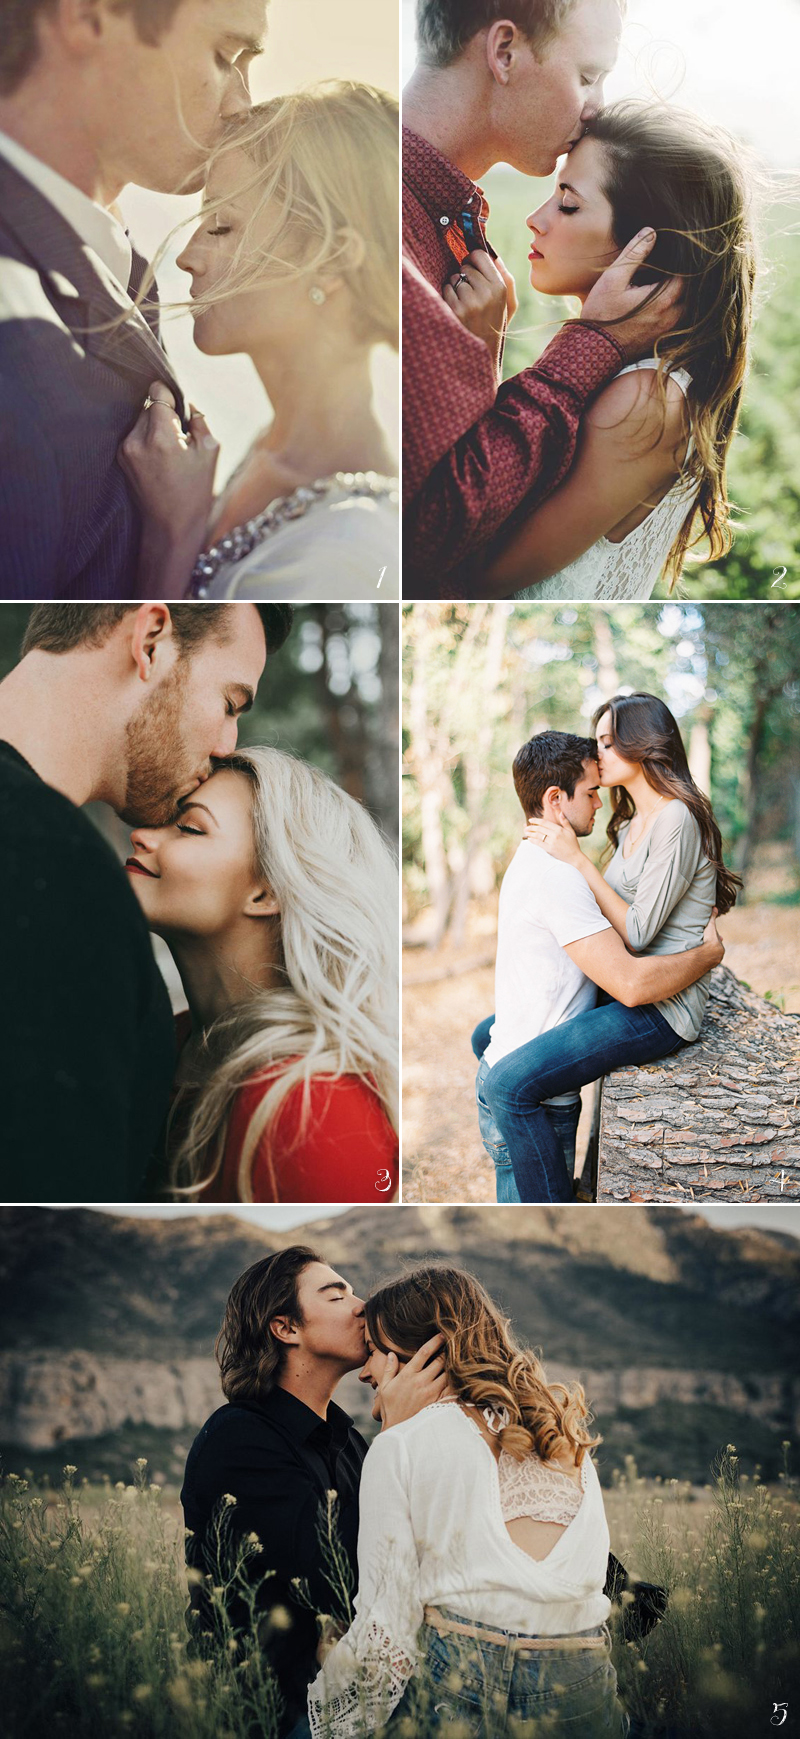 These Engagement Photo Ideas are So Cute! 35 Non-Cheesy Photo Poses For ...